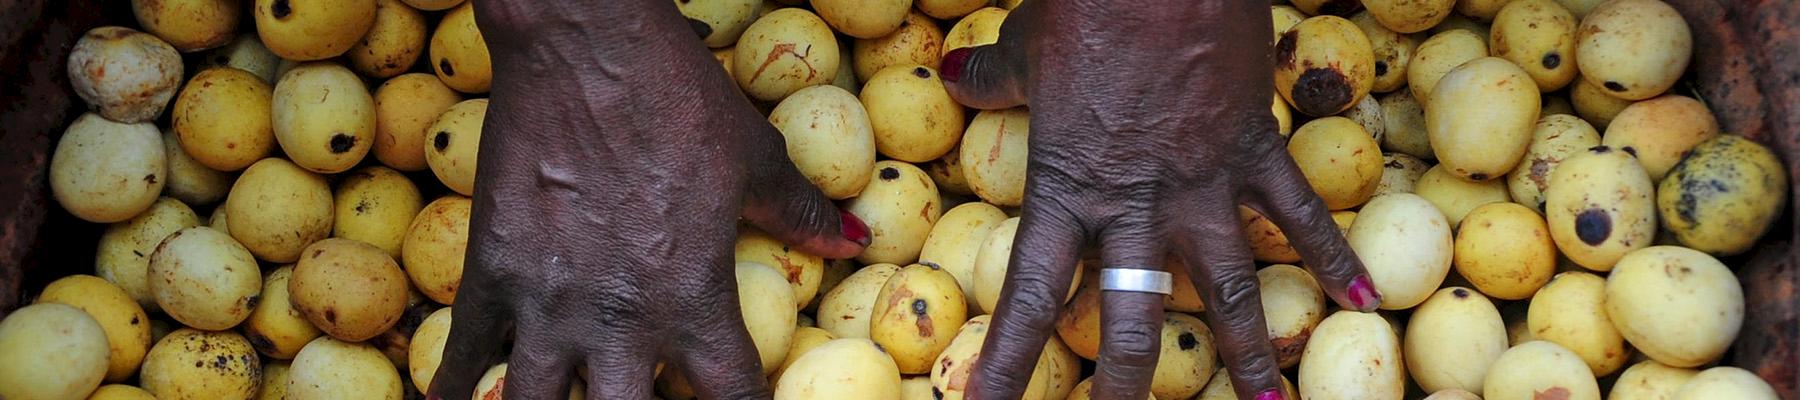 Marula fruit wild-harvested in Limpopo, South Africa. Photo: Shutterstock 2020